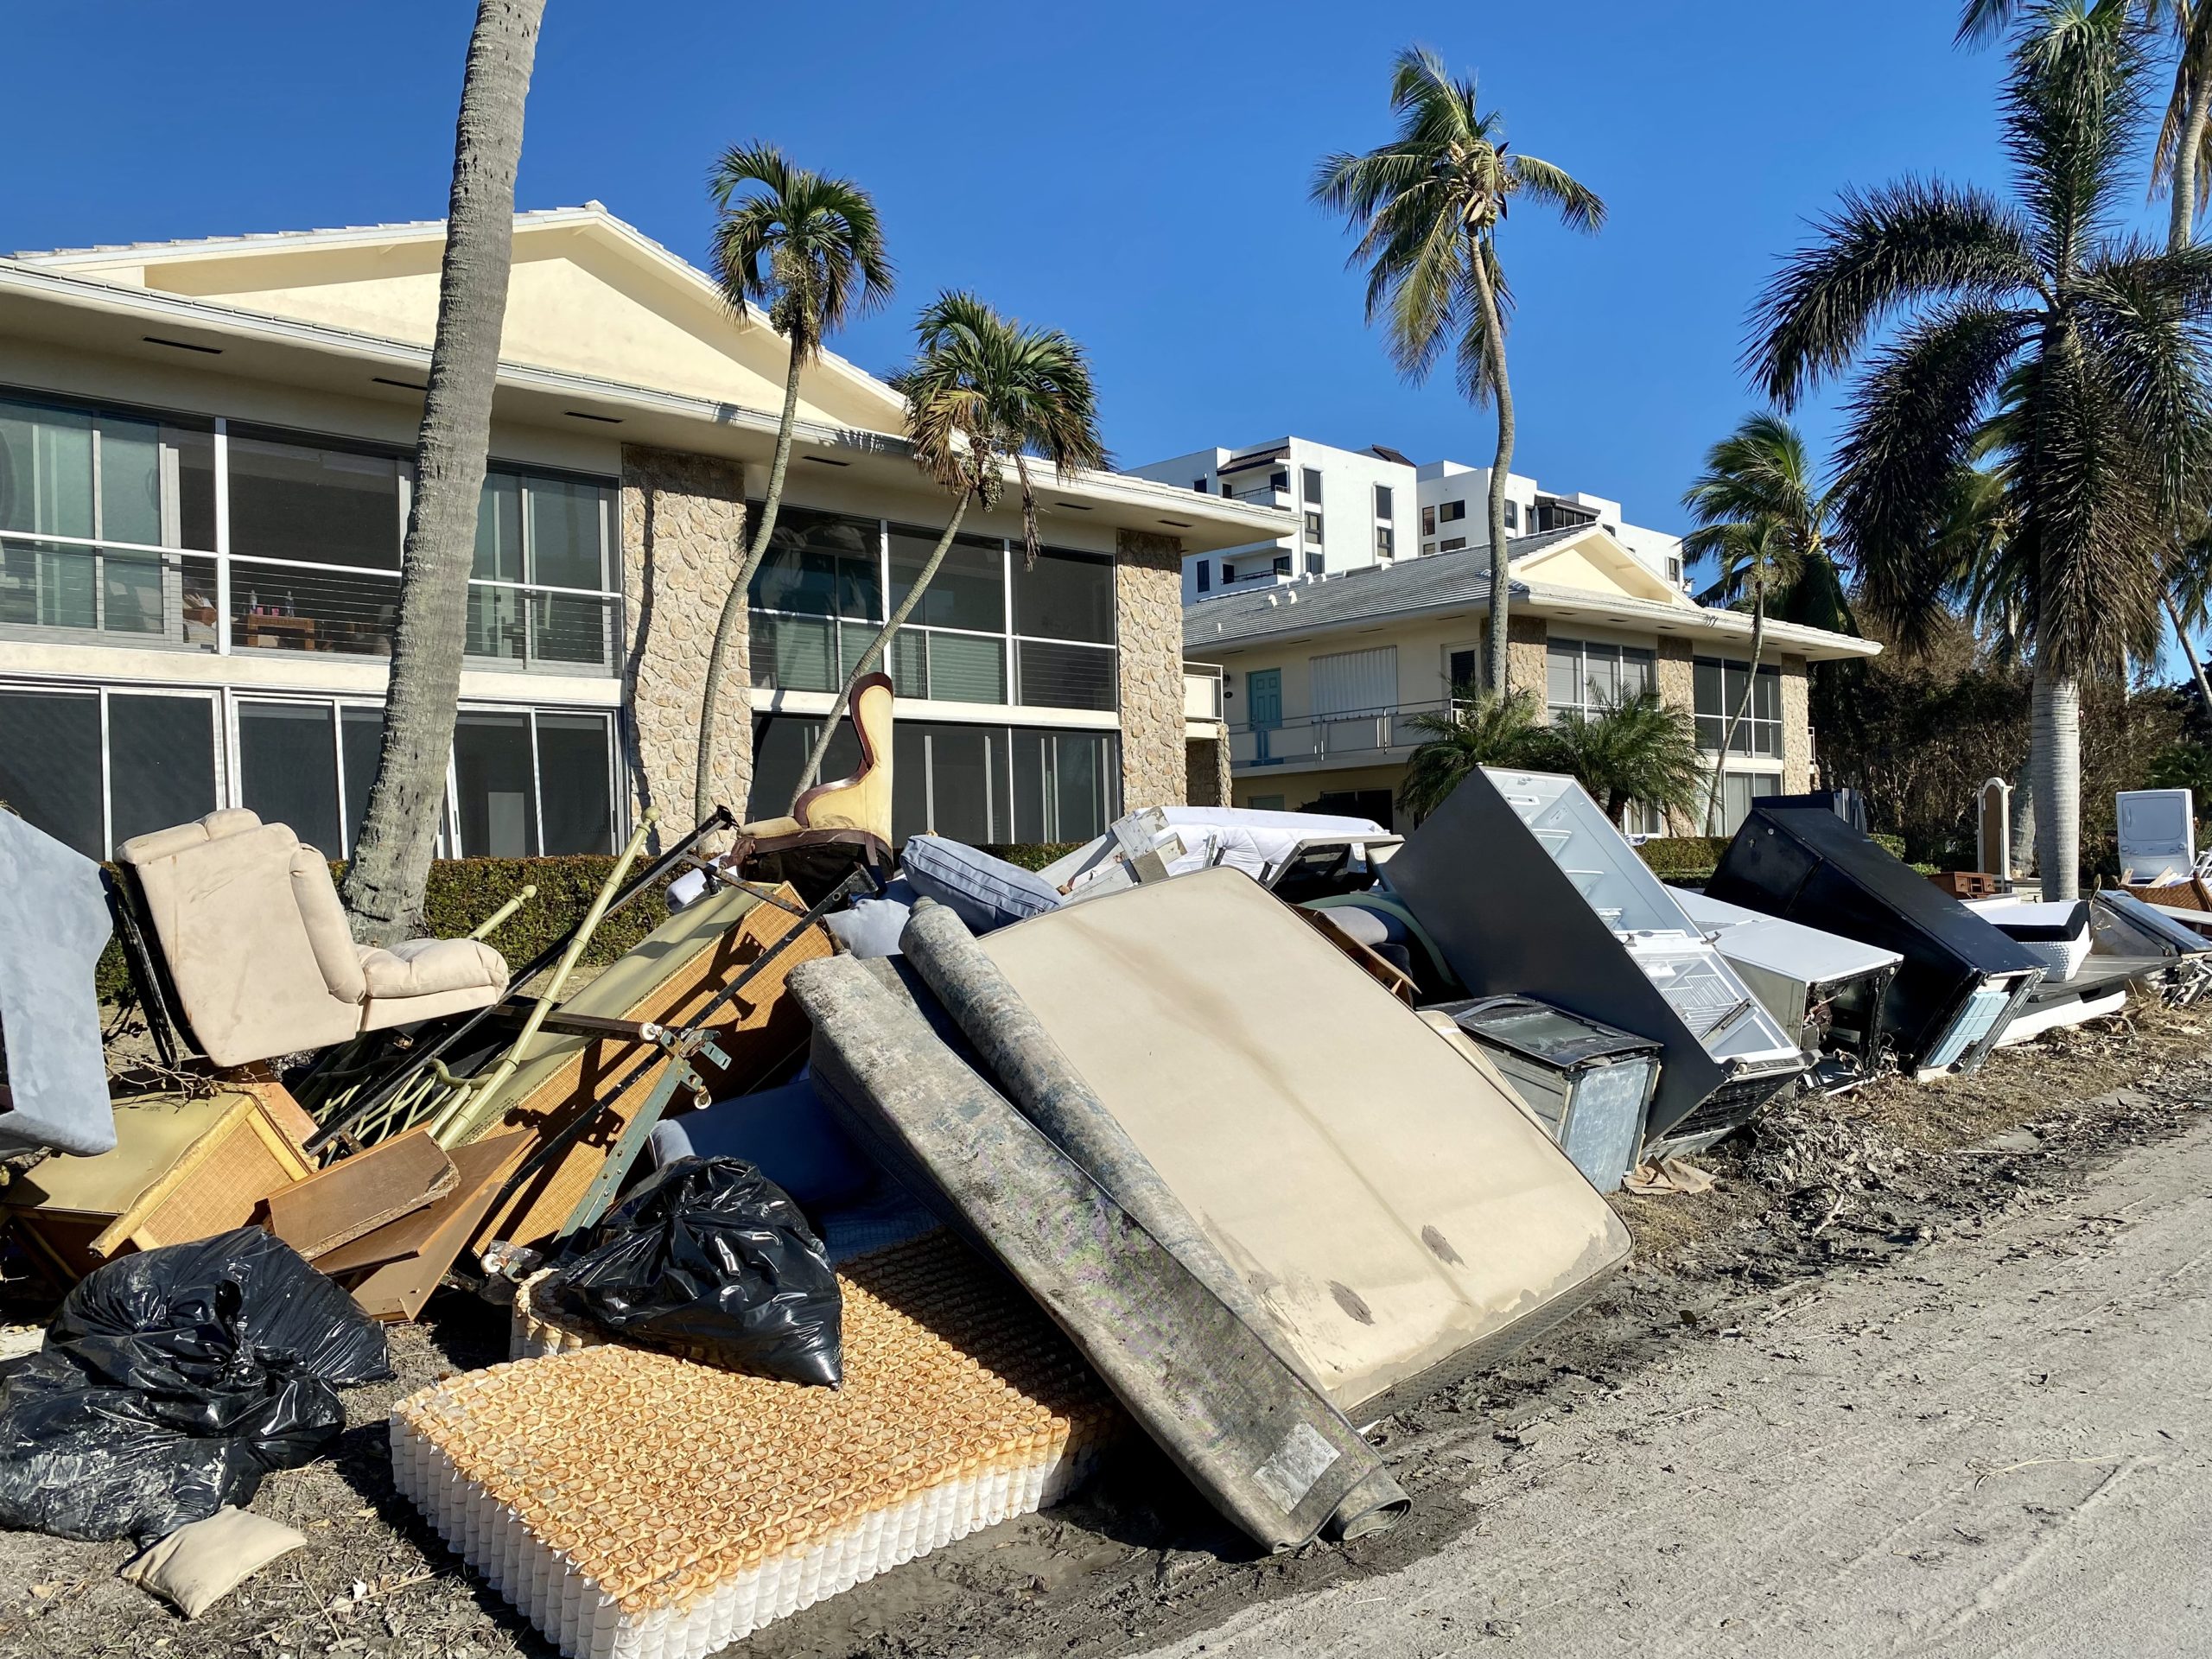 City of Naples extends state of emergency, discusses debris pickup